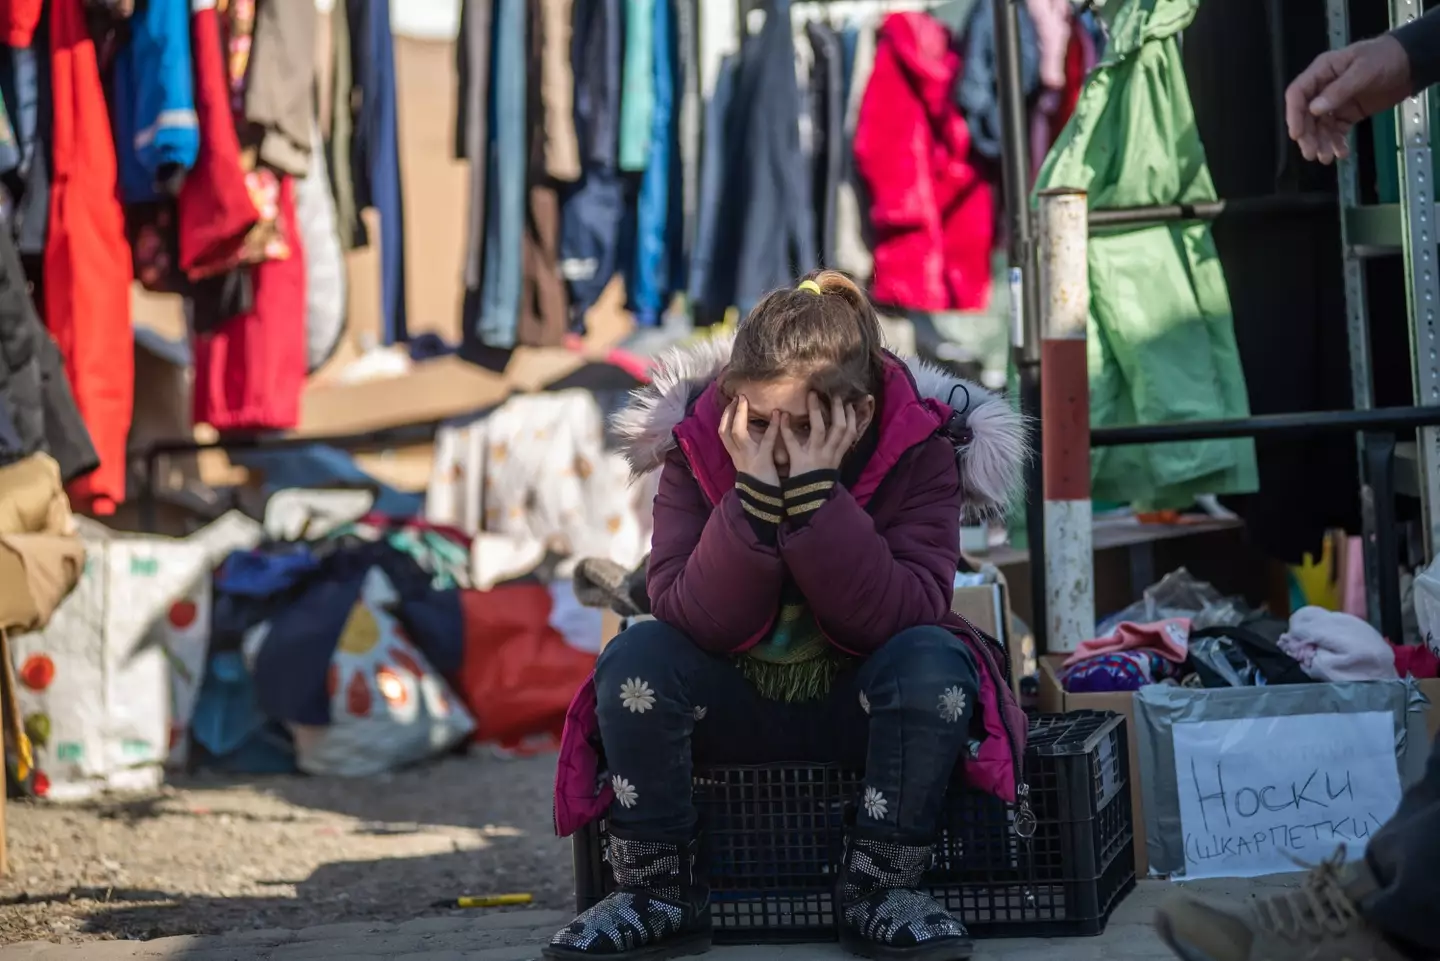 Millions have fled from the war in Ukraine.